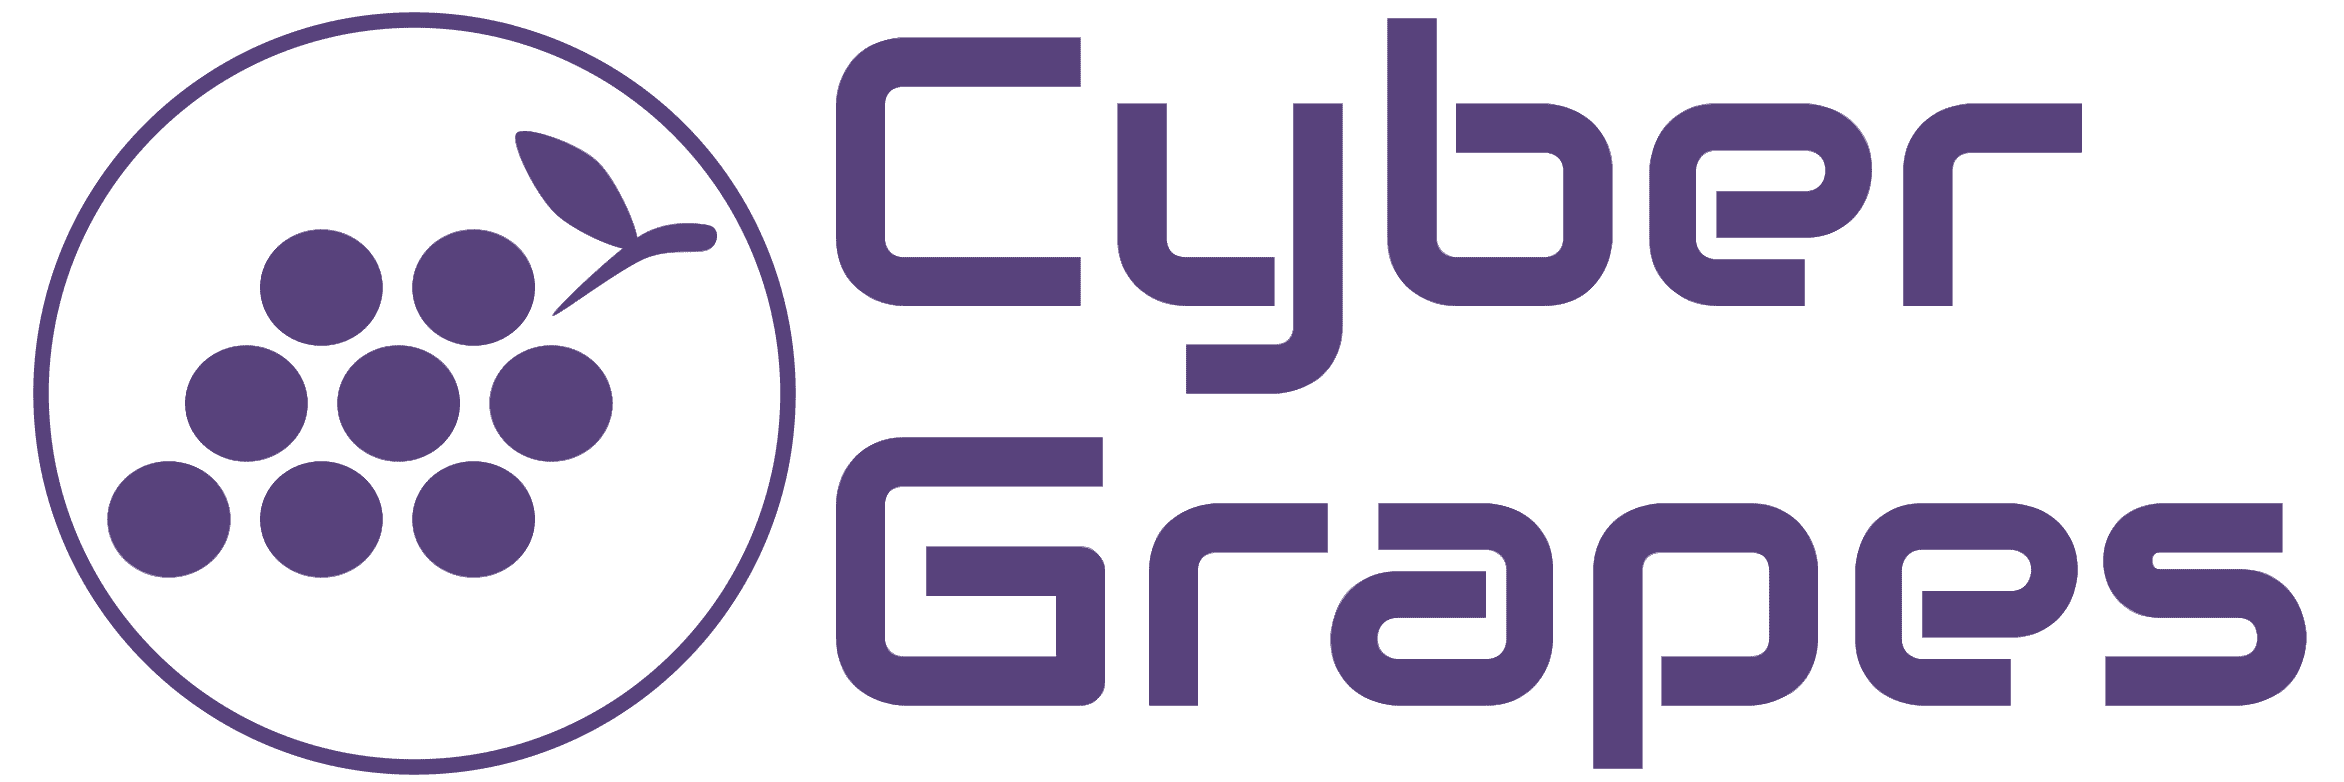 Cyber Grapes Services